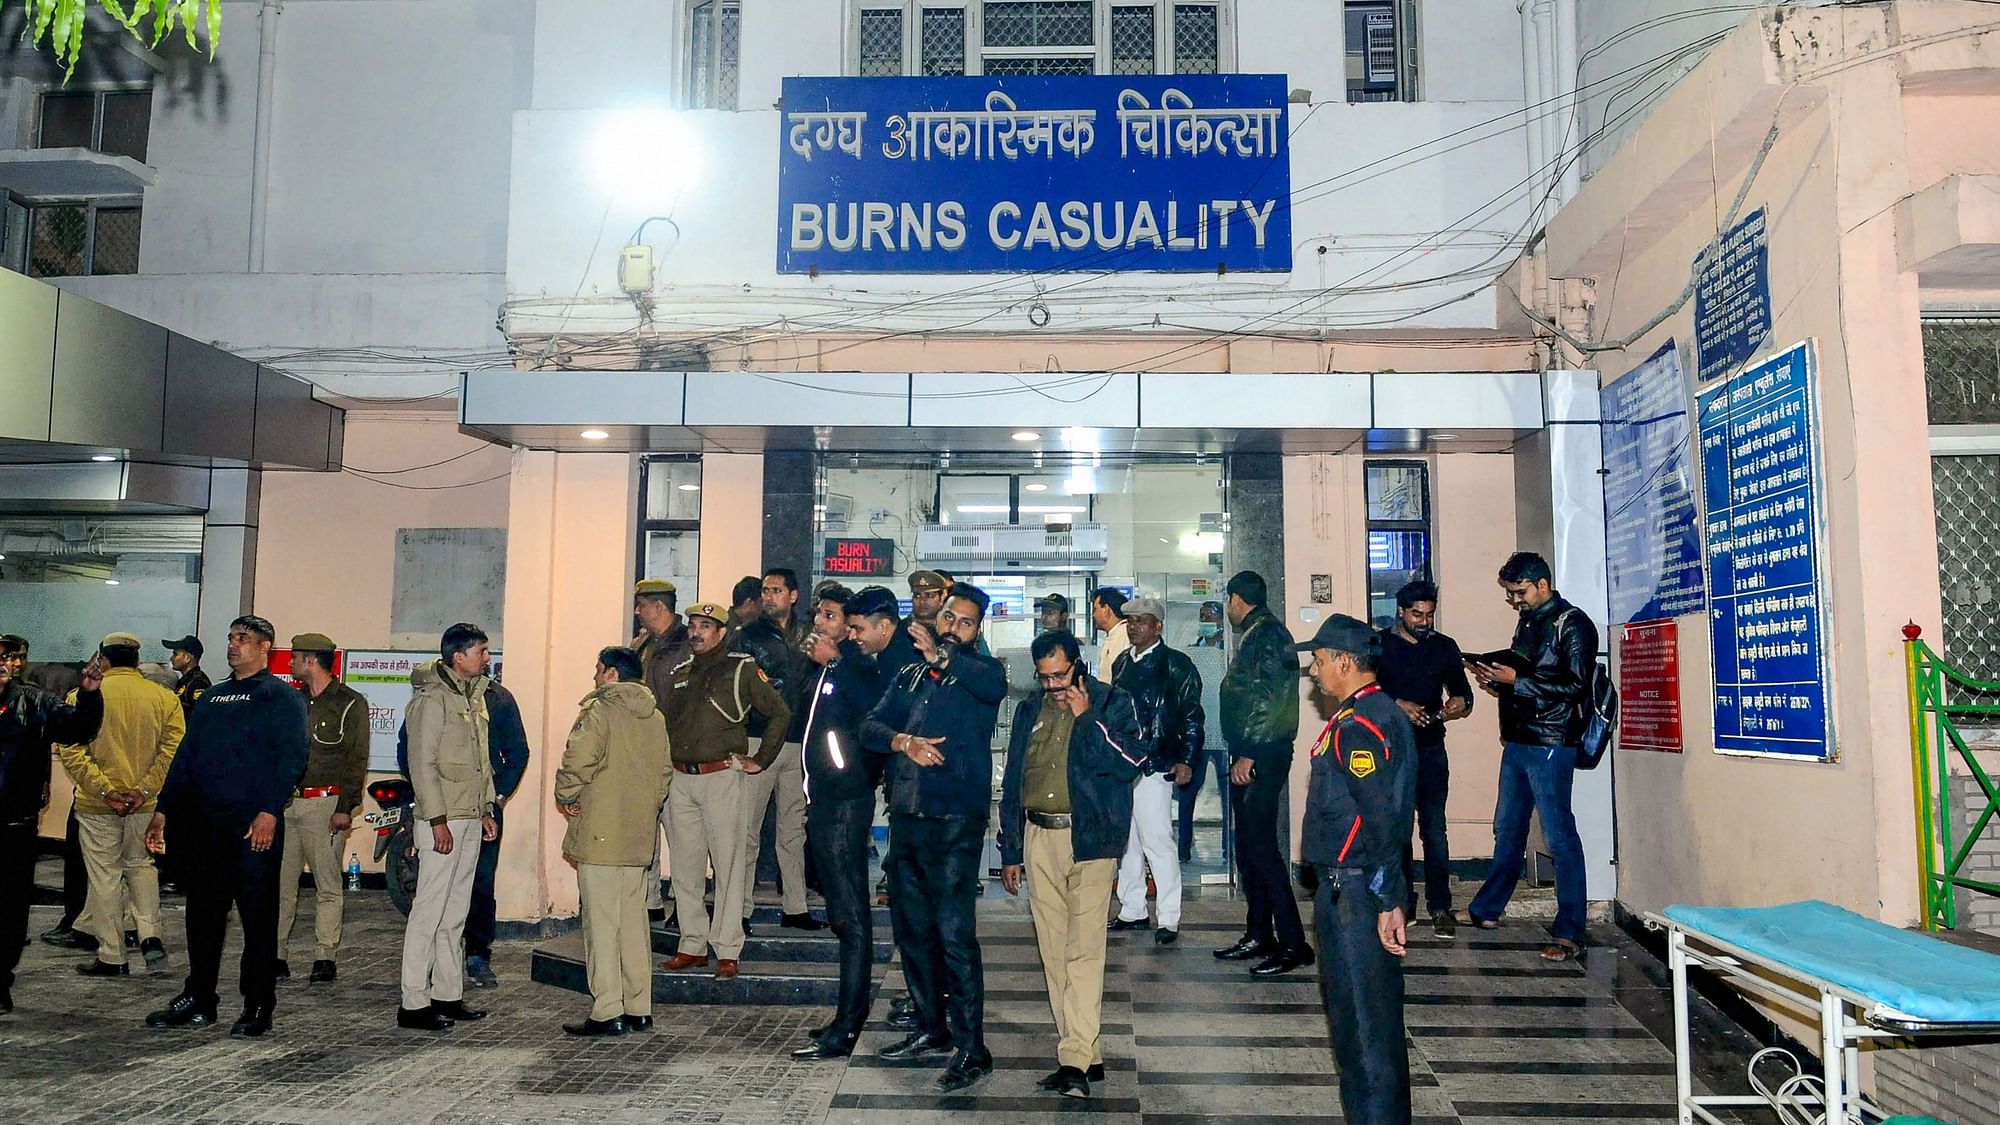 The five men arrested for allegedly setting aflame the Unnao rape survivor were on Friday produced before a court in Unnao and remanded in 14-day judicial custody.